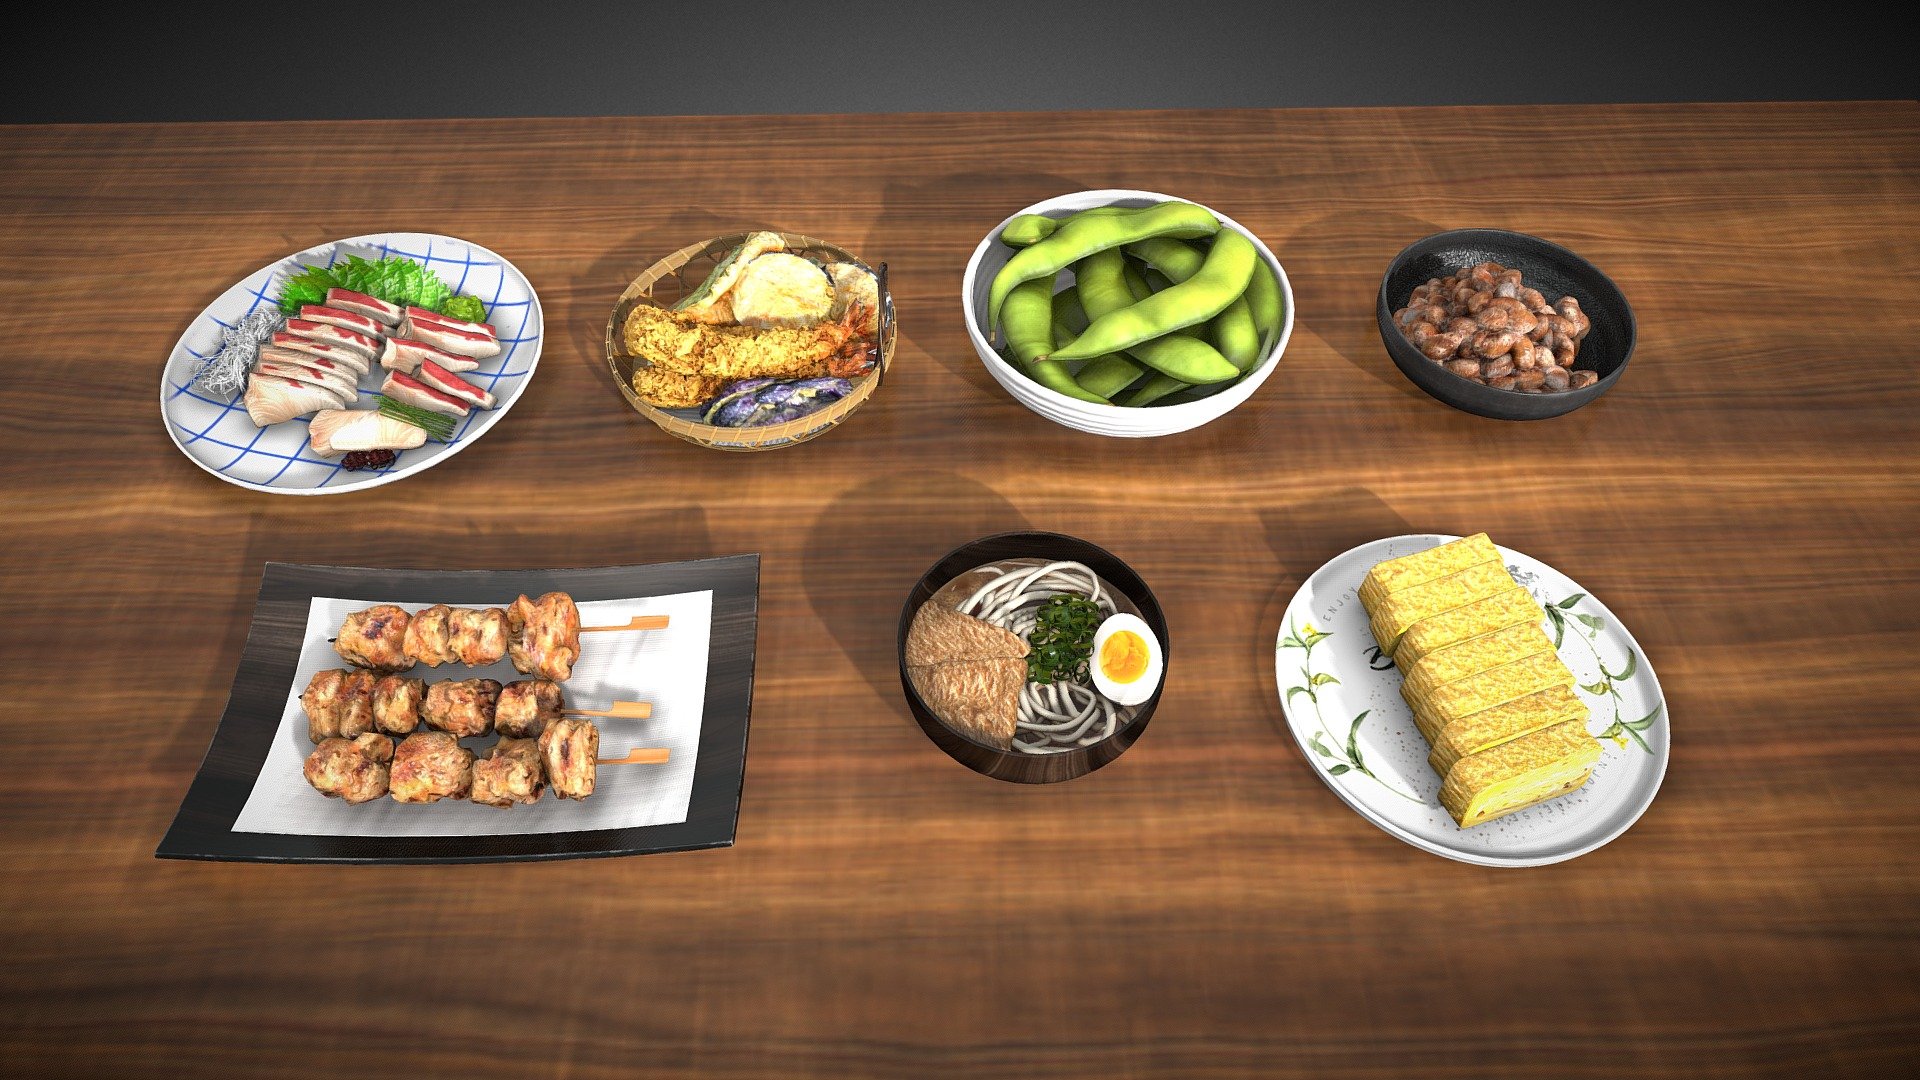 Japanese Food Vol - 1 contains low poly 3D models of japanese foods with High Quality textures to fill up your game environment. The assets are VR-Ready and game ready . 

Total Polygons - 83788

For Unity3d (Built-in, URP, HDRP) Ready Assets visit our Unity Asset Store Page

Enjoy and please rate the asset!

Contact us on for AR/VR related queries and development support

Gmail - designer@devdensolutions.com

Website

Twitter

Instagram

Facebook

Linkedin

Youtube - Japanese Food Vol - 1 - Buy Royalty Free 3D model by Devden 3d model